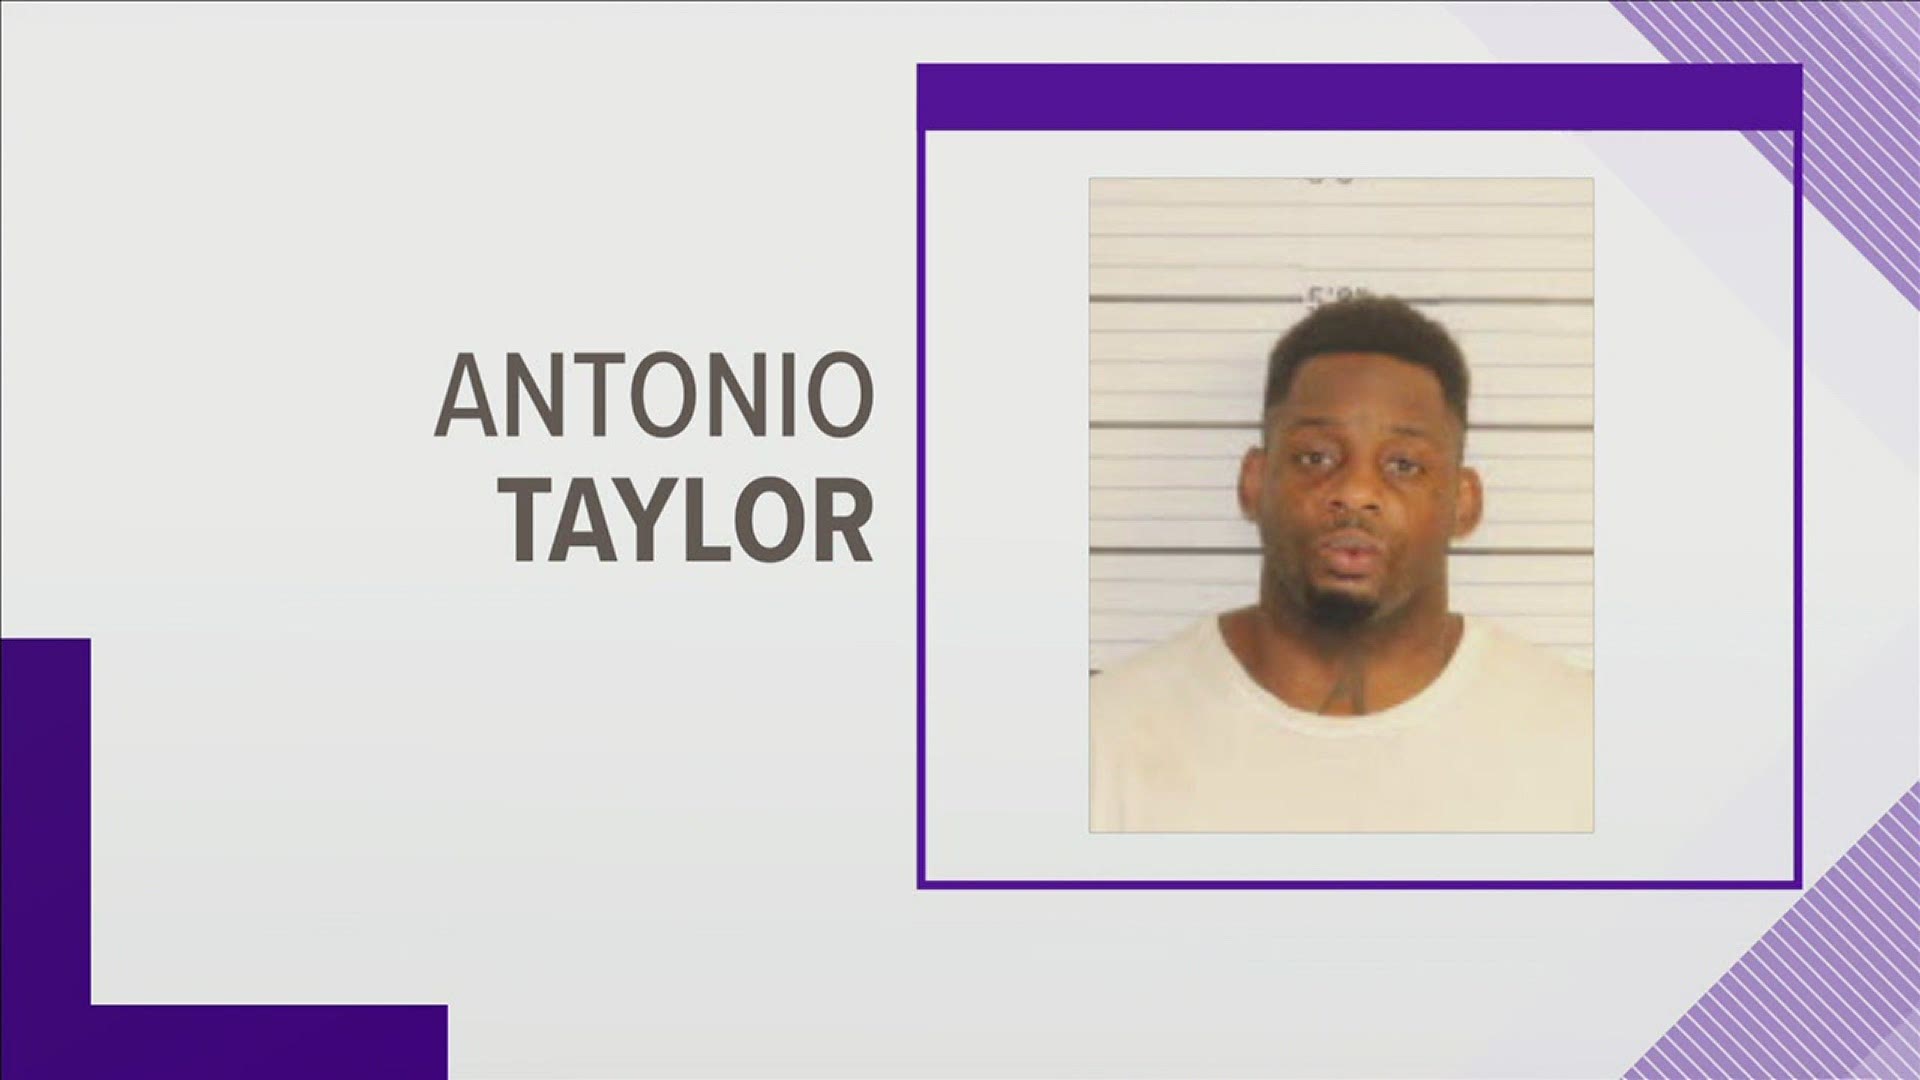 31-year-old Antonio Taylor faces several charges including rape, kidnapping, and assault.